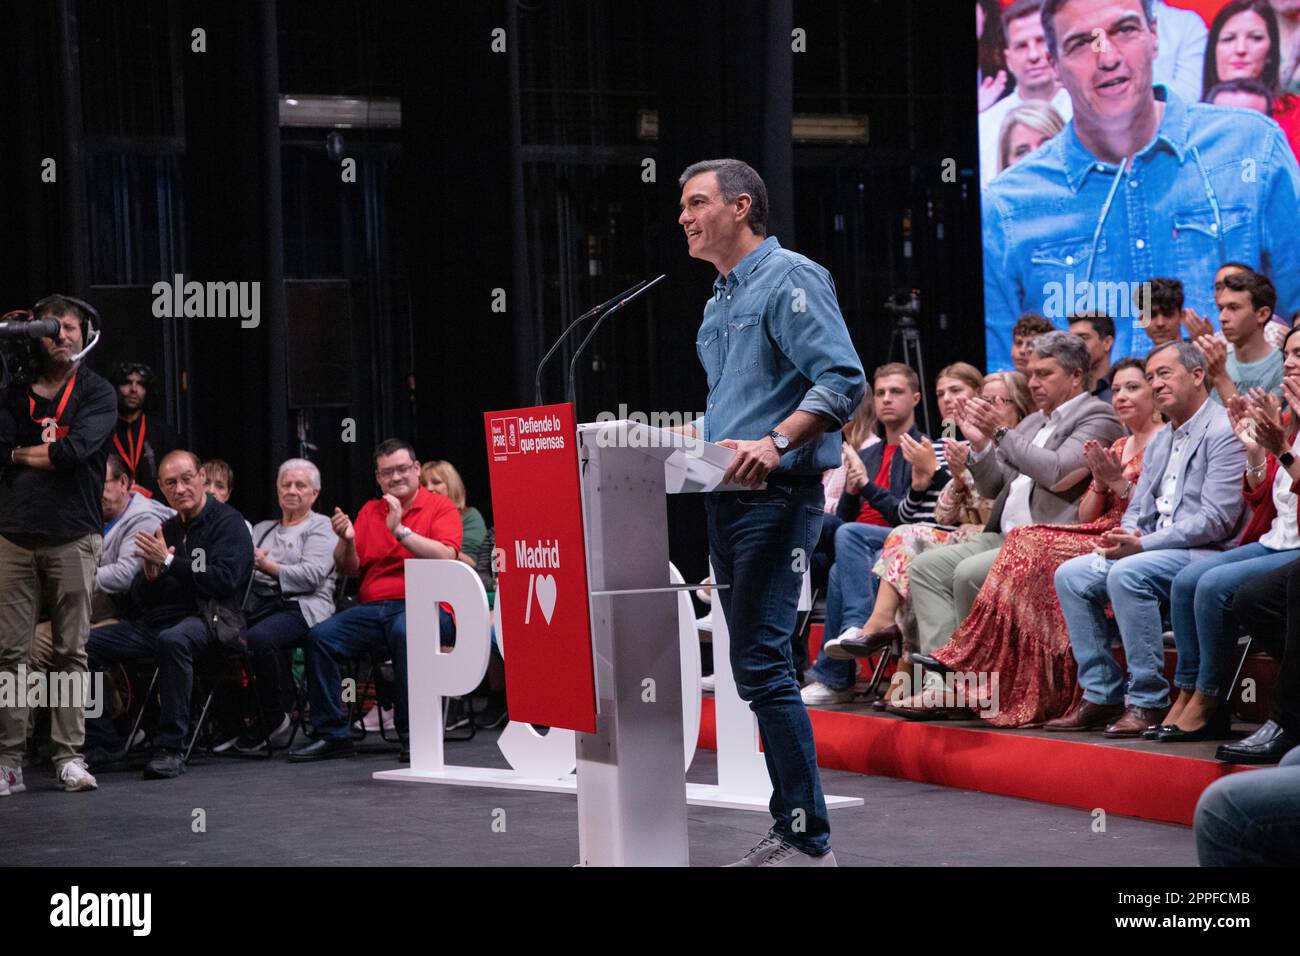 Pedro Sanchez. Juan Lobato. Javier Ayala. Massive act of the PSOE with the mayor, candidate for the Community of Madrid and president of Spain Stock Photo